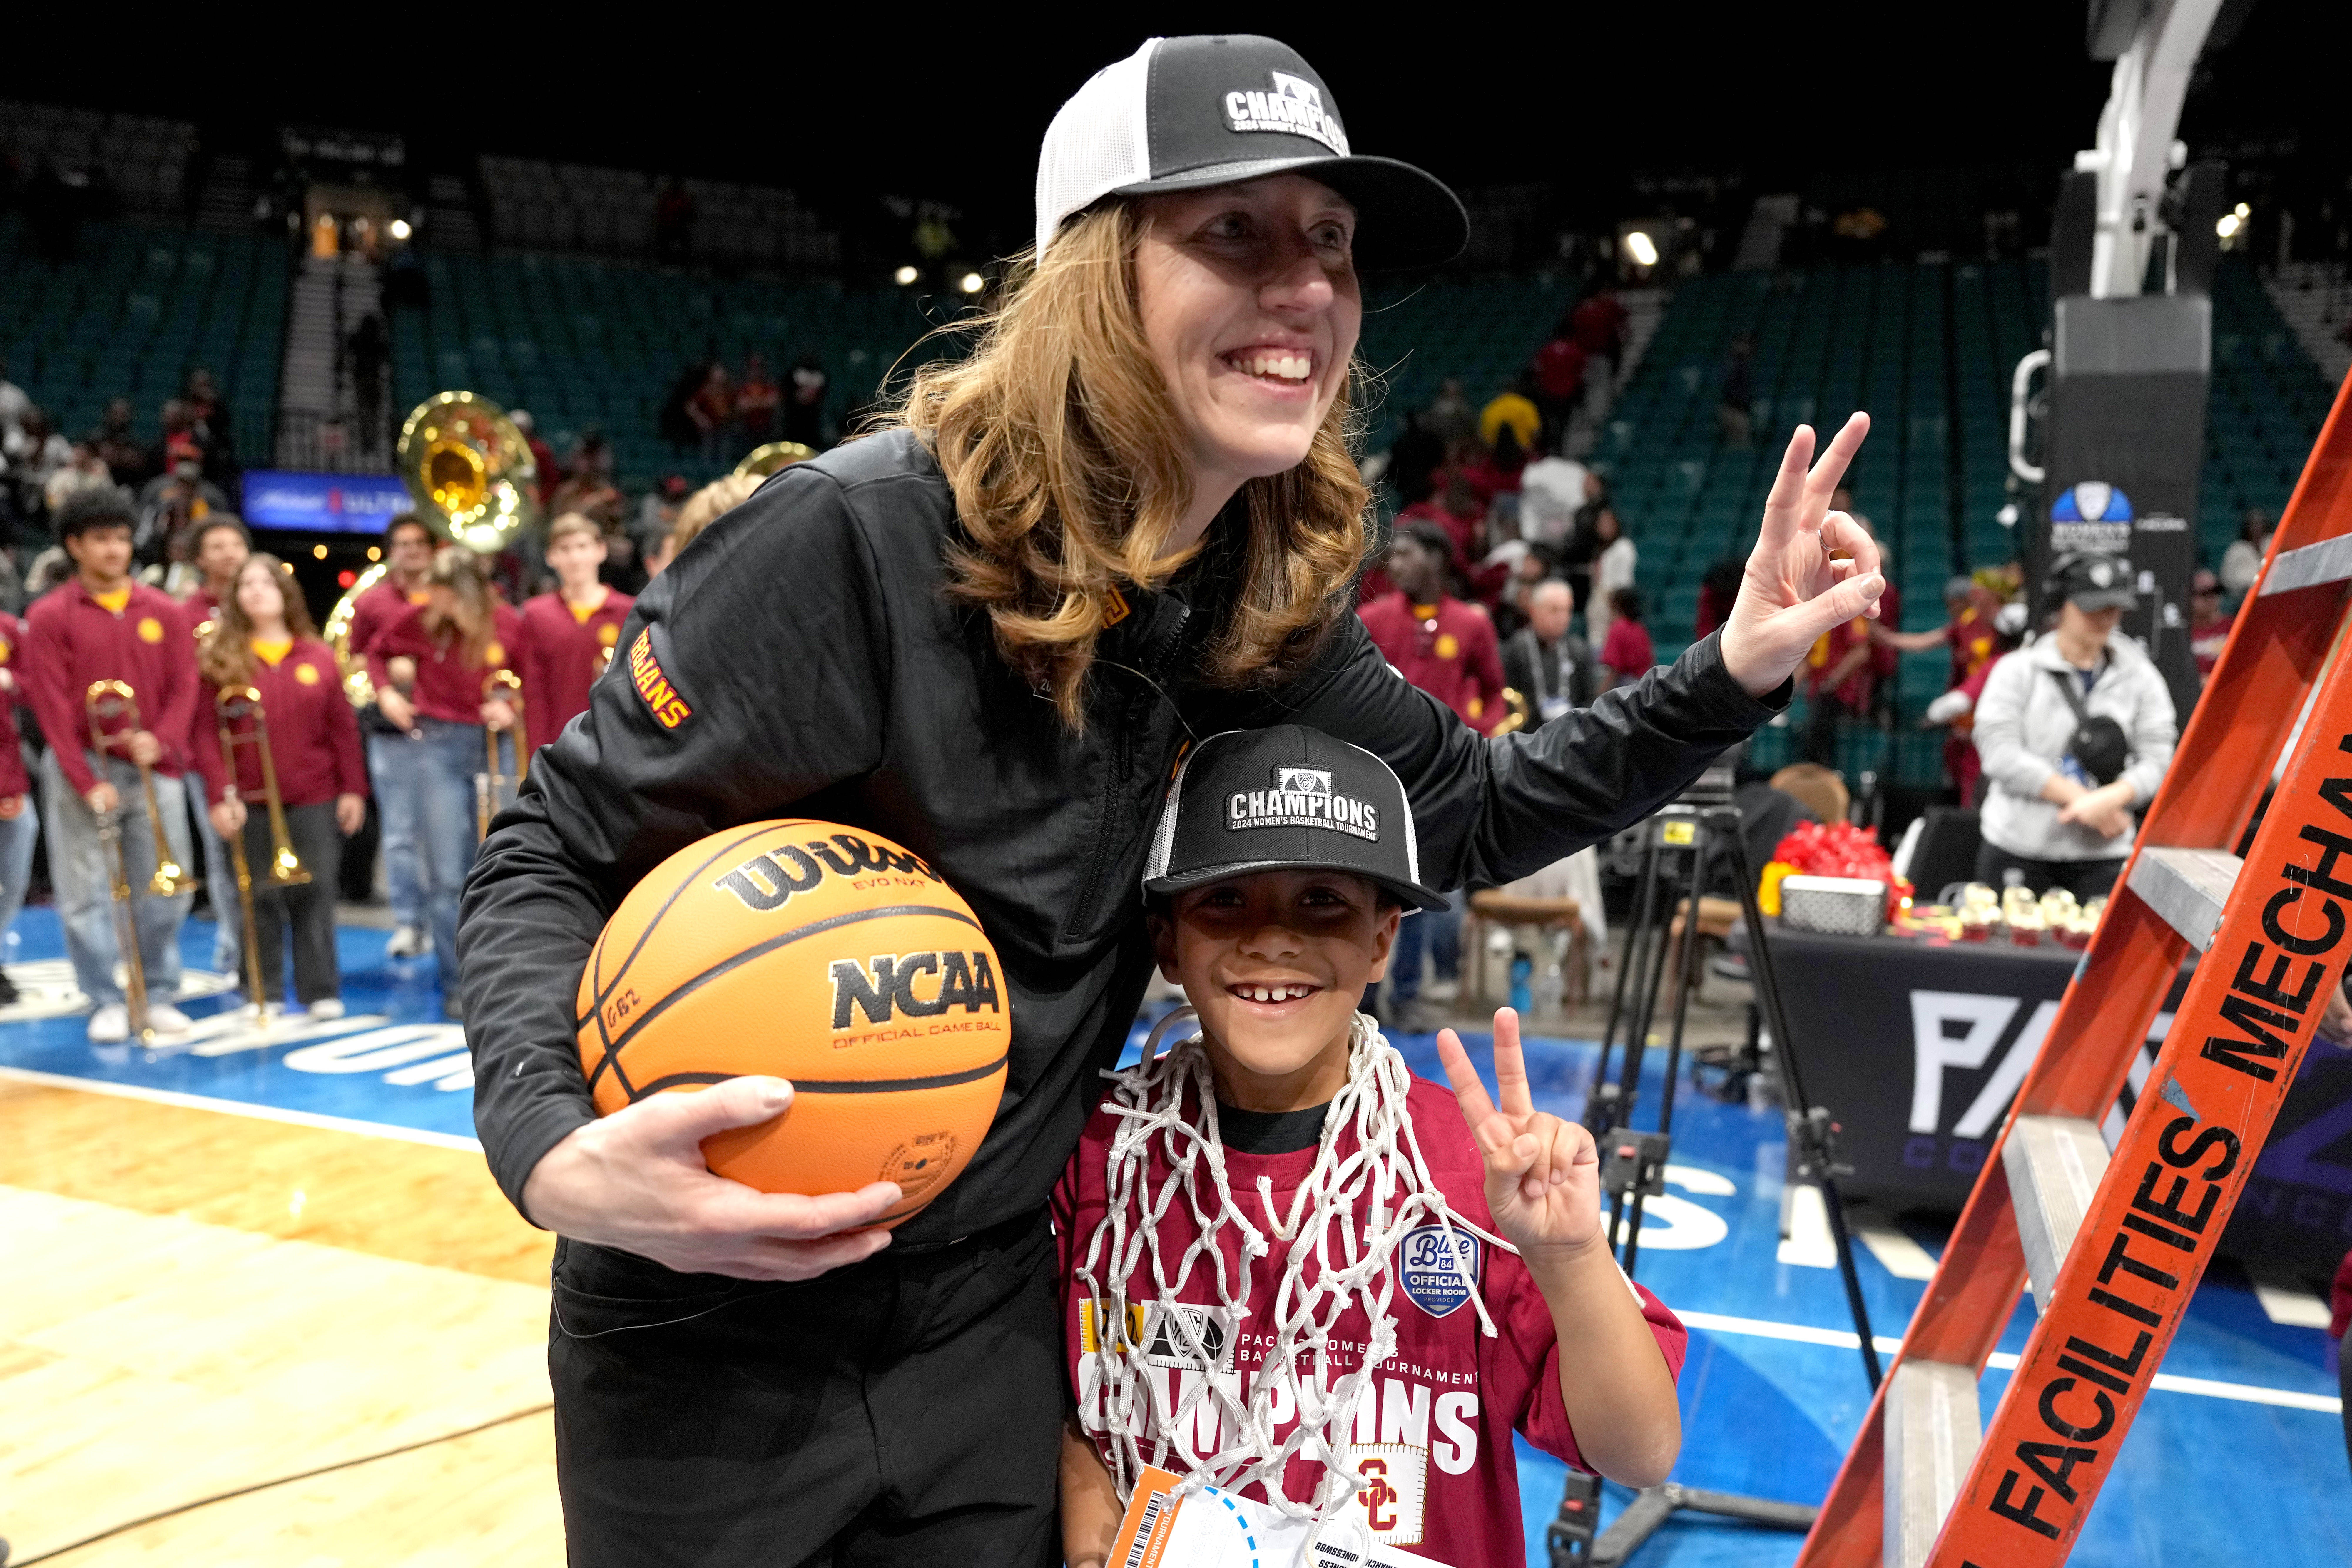 Part 1 of the Lindsay Gottlieb ‘Box Out Colon Cancer’ interview